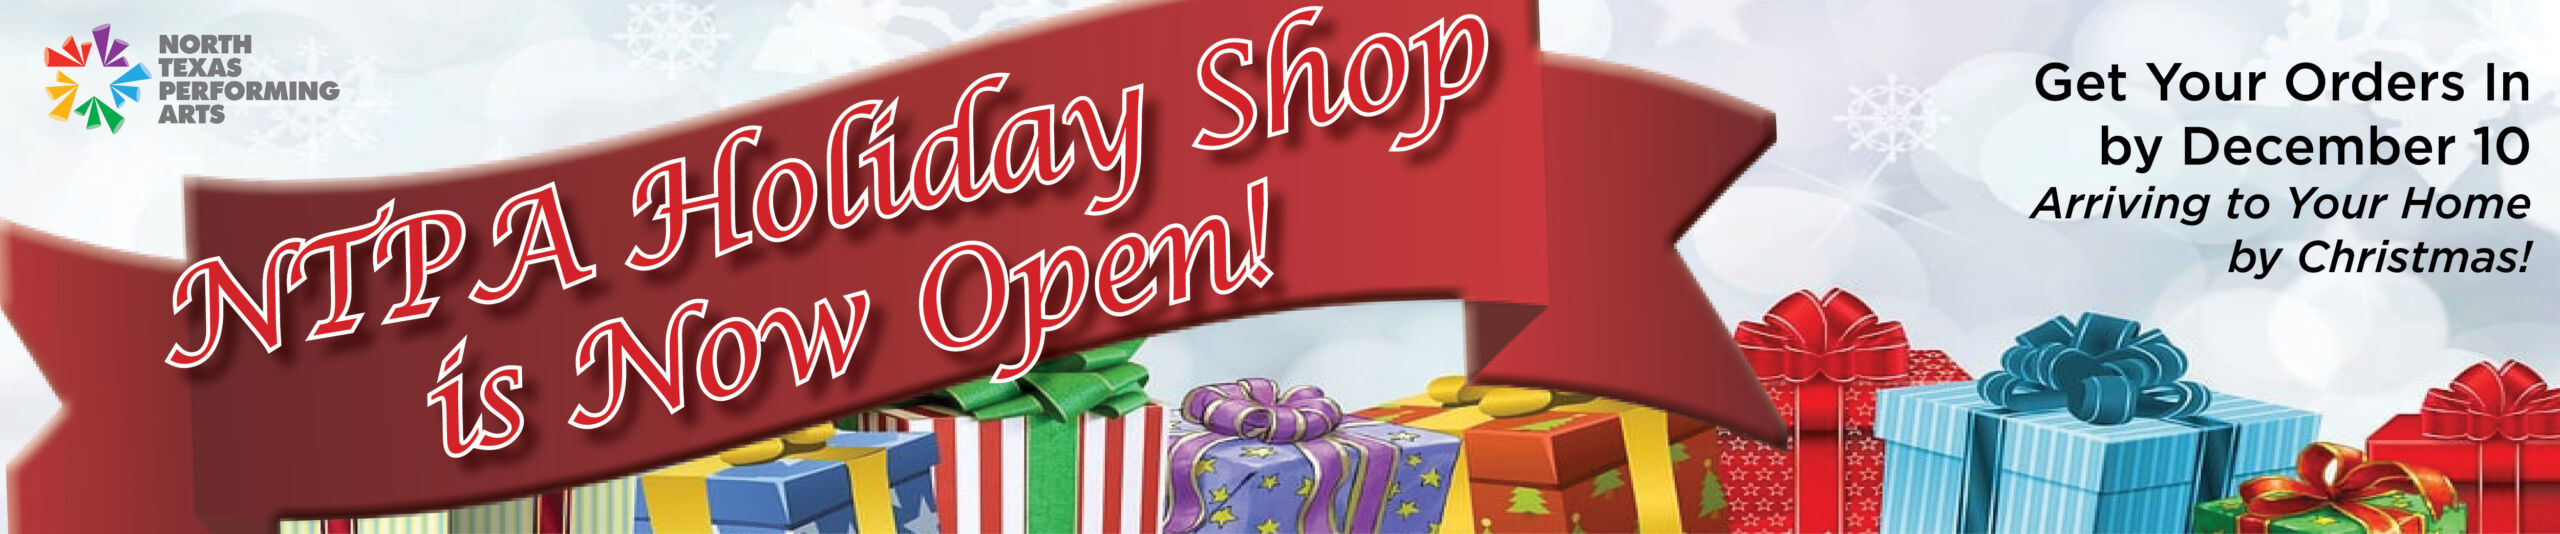 NTPA Holiday Shop Now Open. Order by December 10 to arrive by Christmas